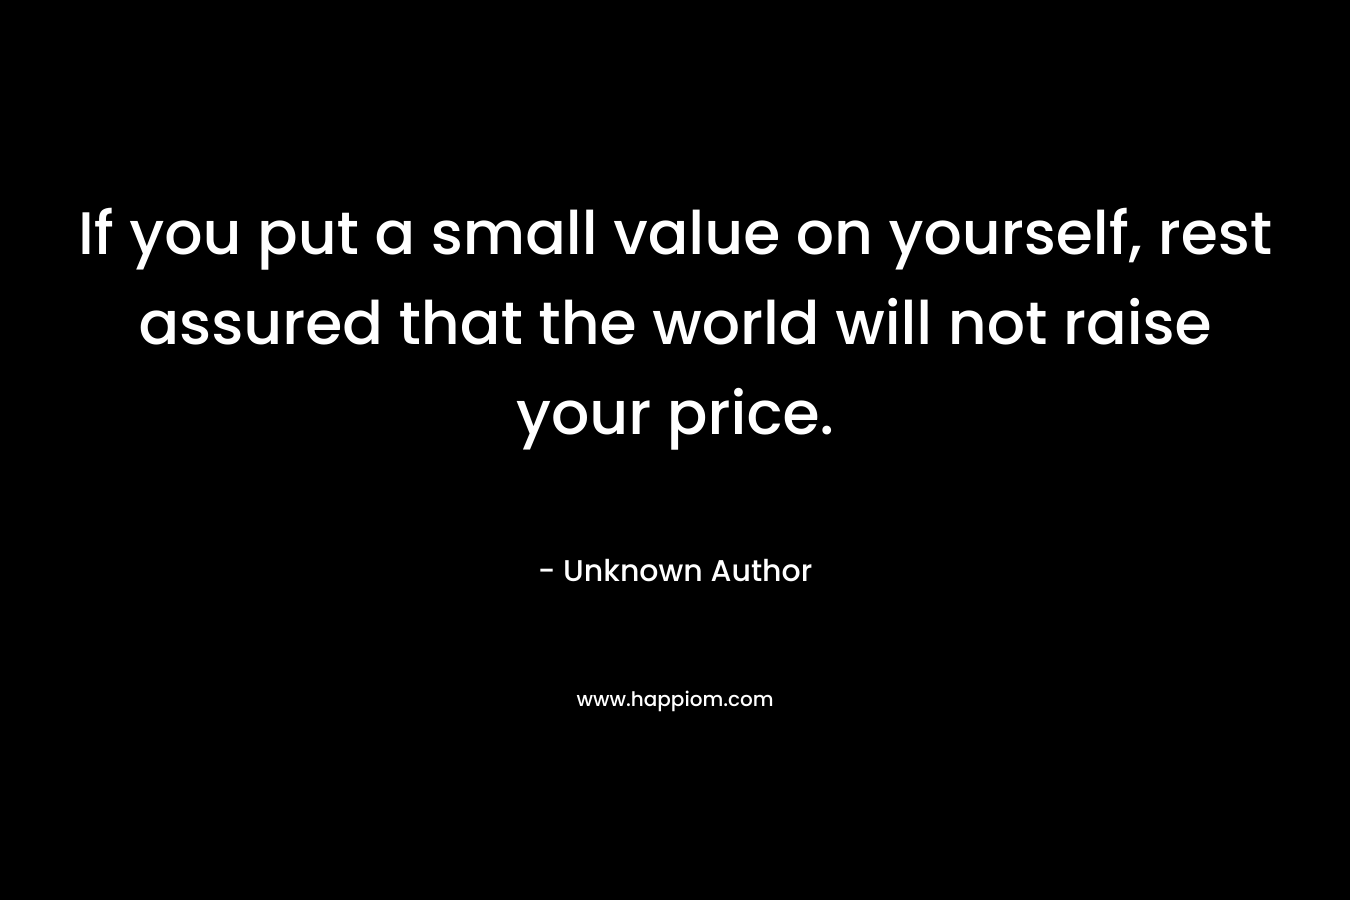 If you put a small value on yourself, rest assured that the world will not raise your price.